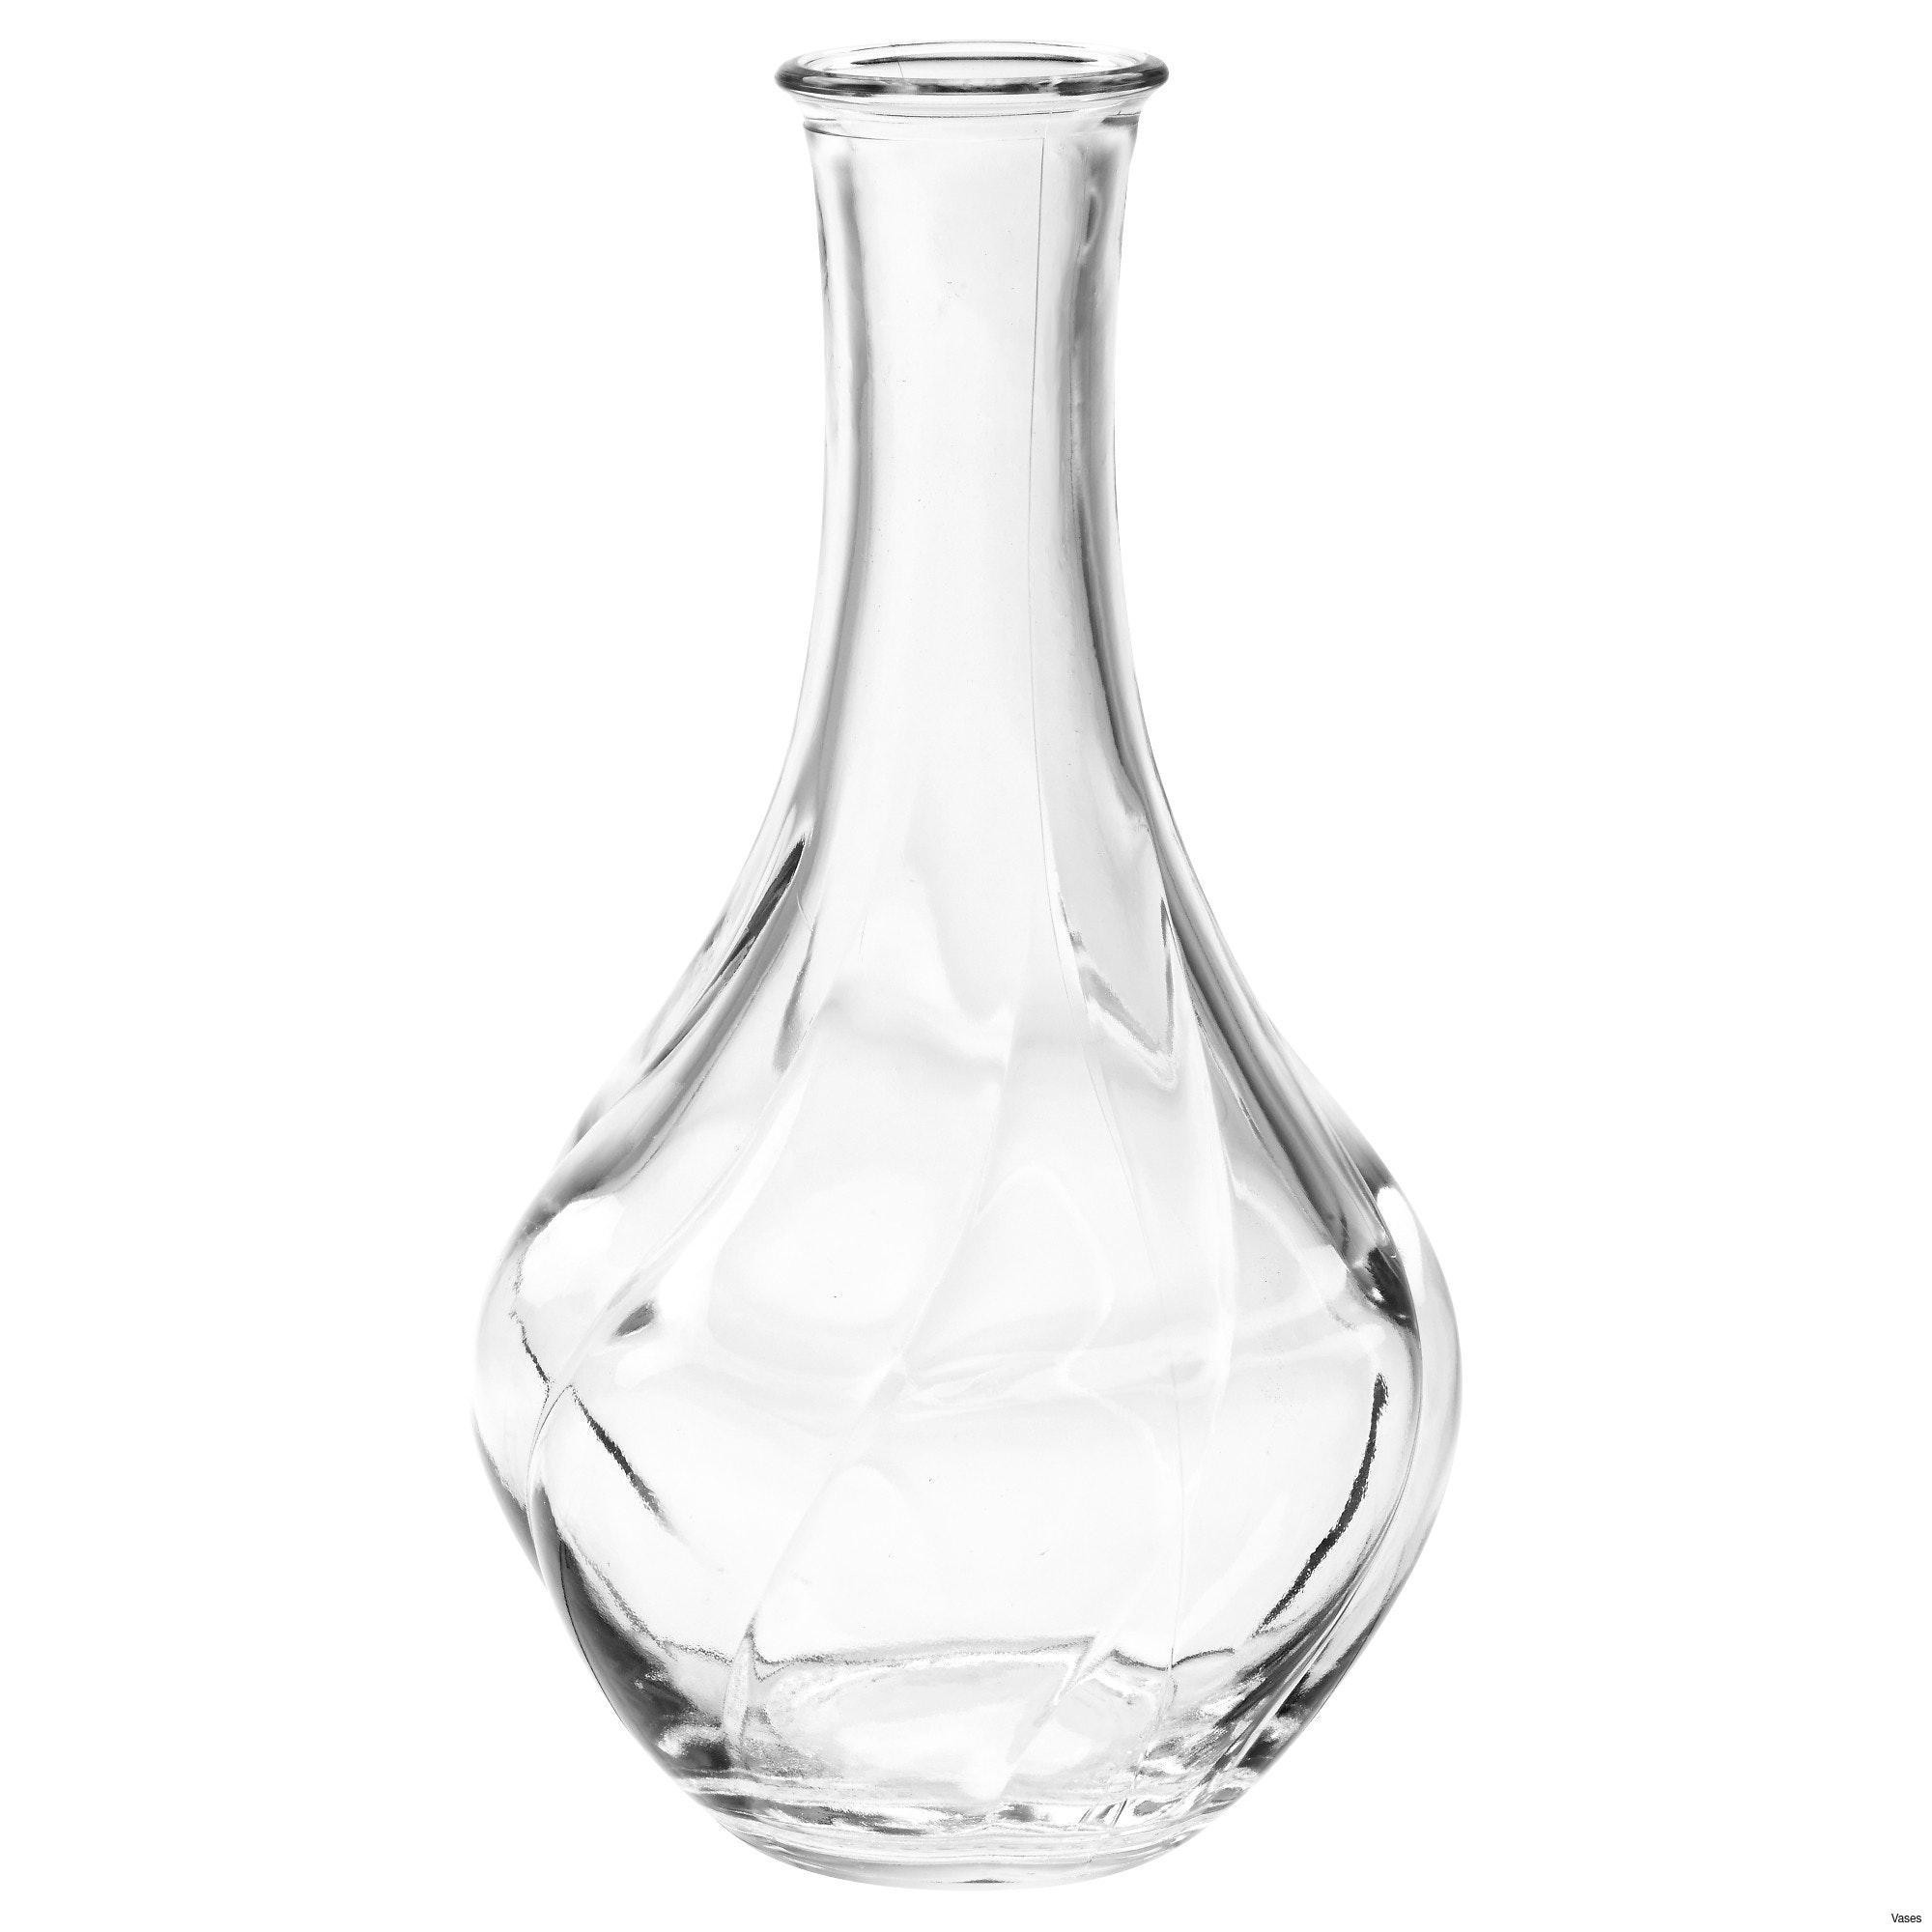 18 Ideal 6 Inch Crystal Vase 2024 free download 6 inch crystal vase of collection of extra large glass vase vases artificial plants intended for extra large glass vase image living room glass vases fresh clear vase 0d tags amazing and